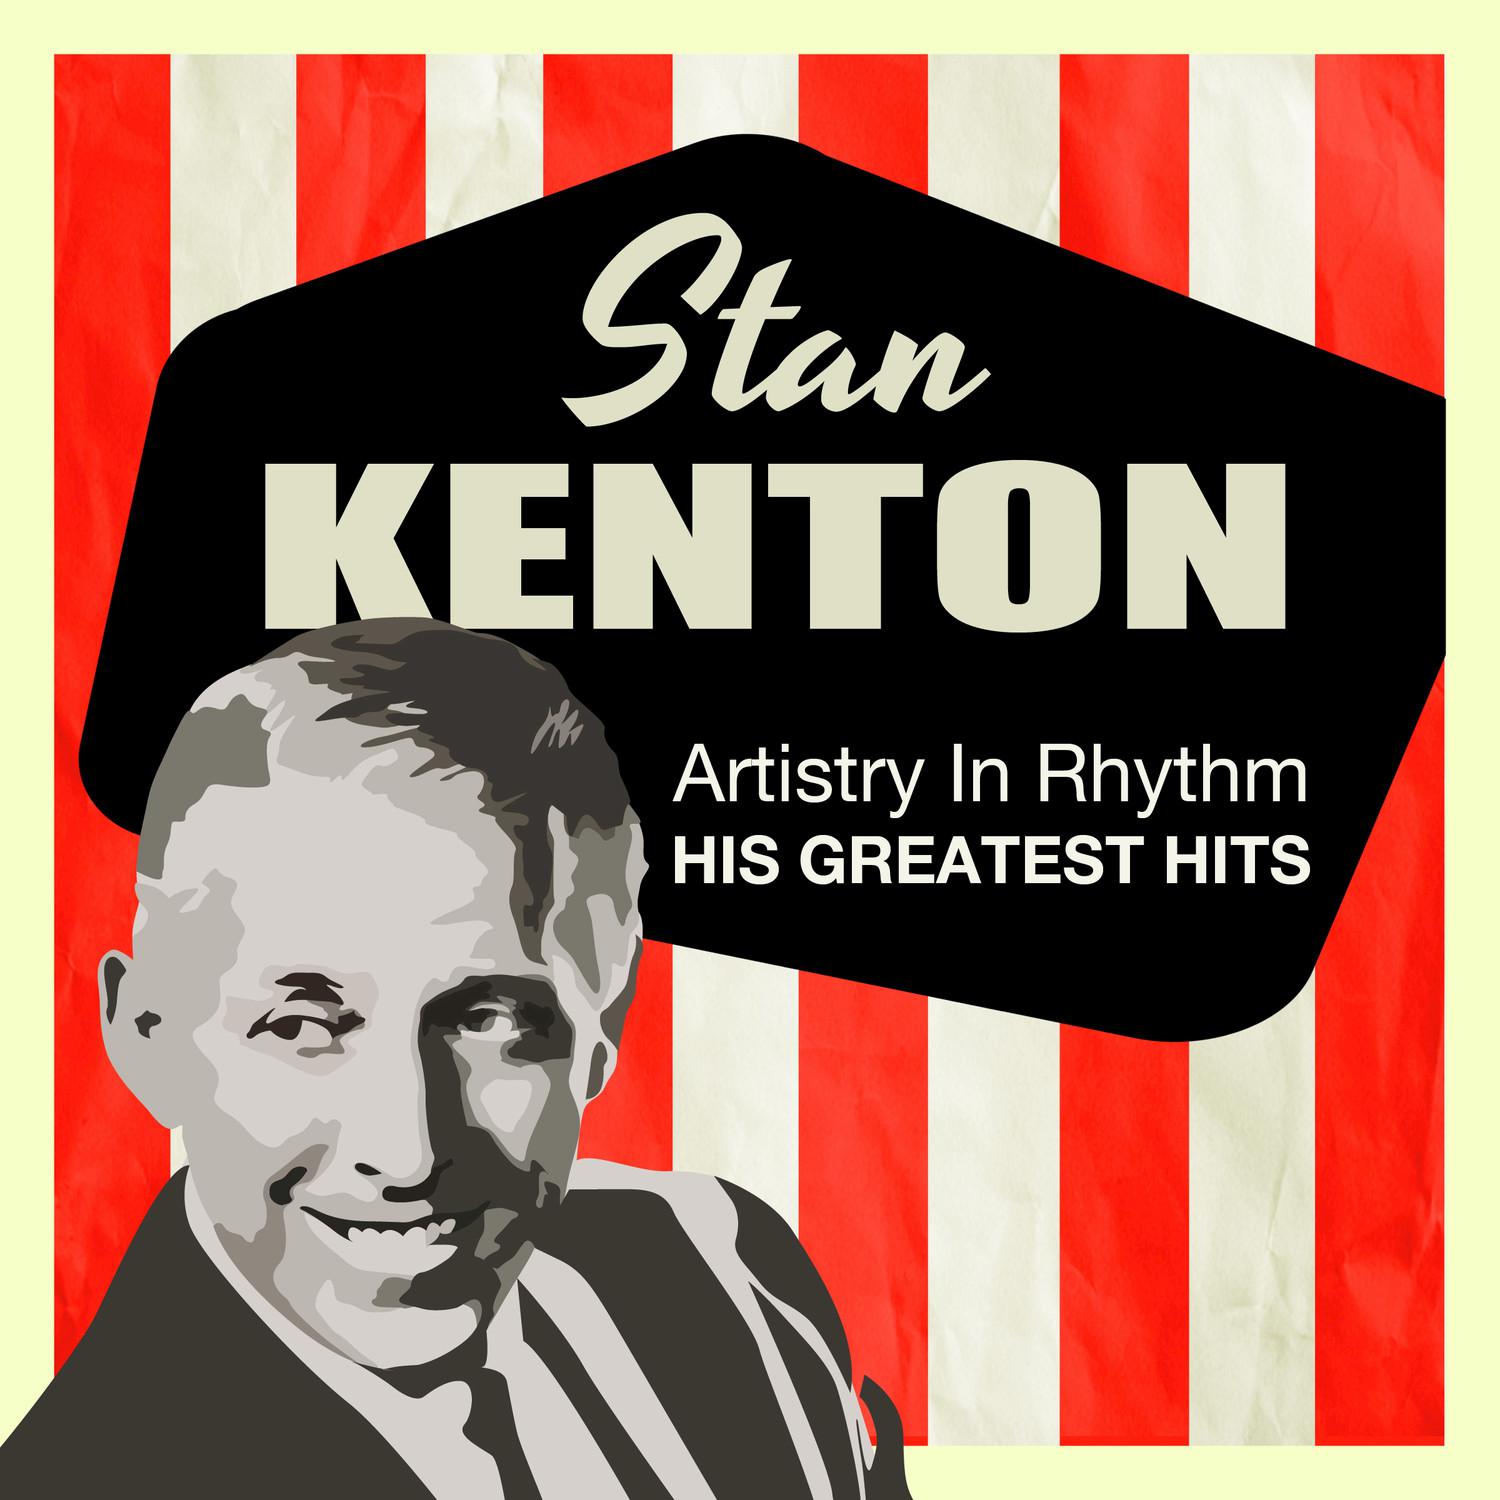 Artistry in Rhythm: His Greatest Hits